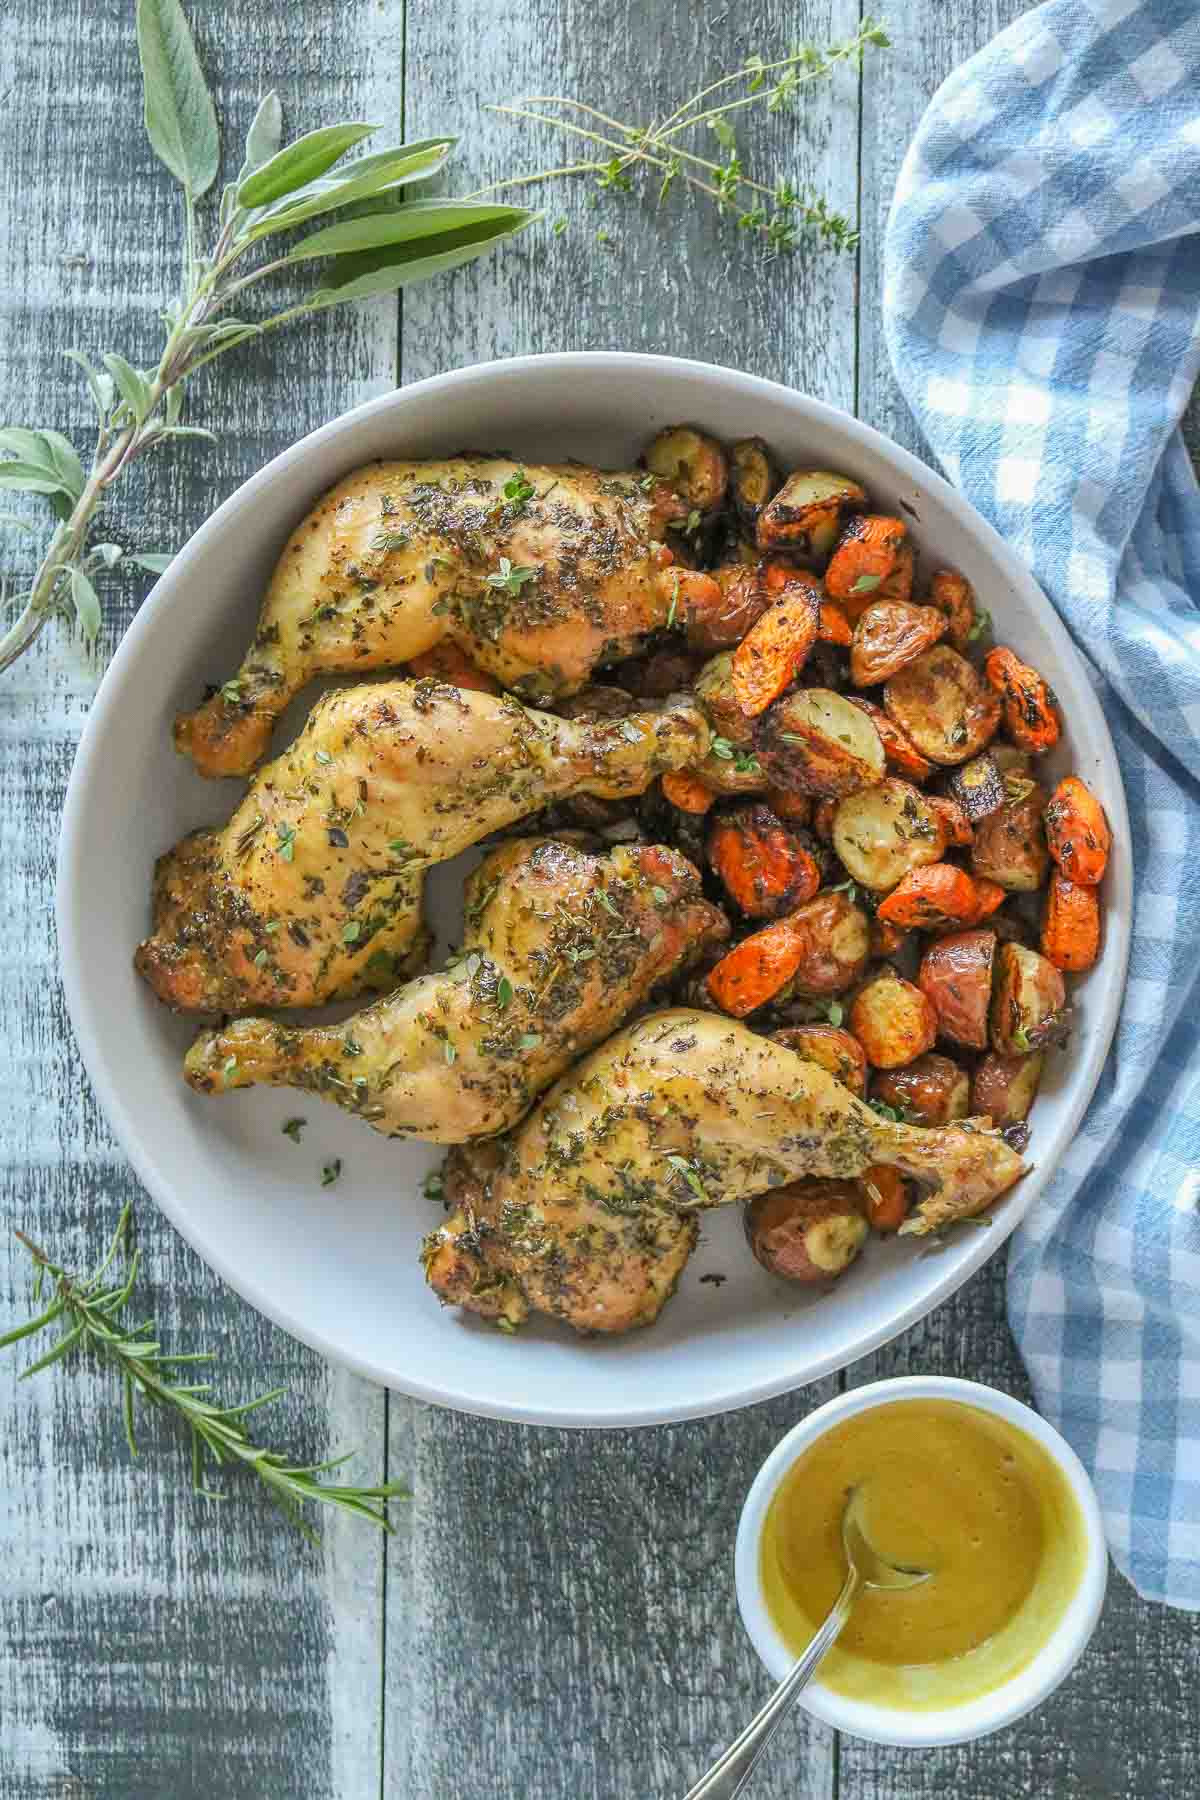 Roasted chicken legs and veggies in a serving dish, next to dish of honey mustard sauce.